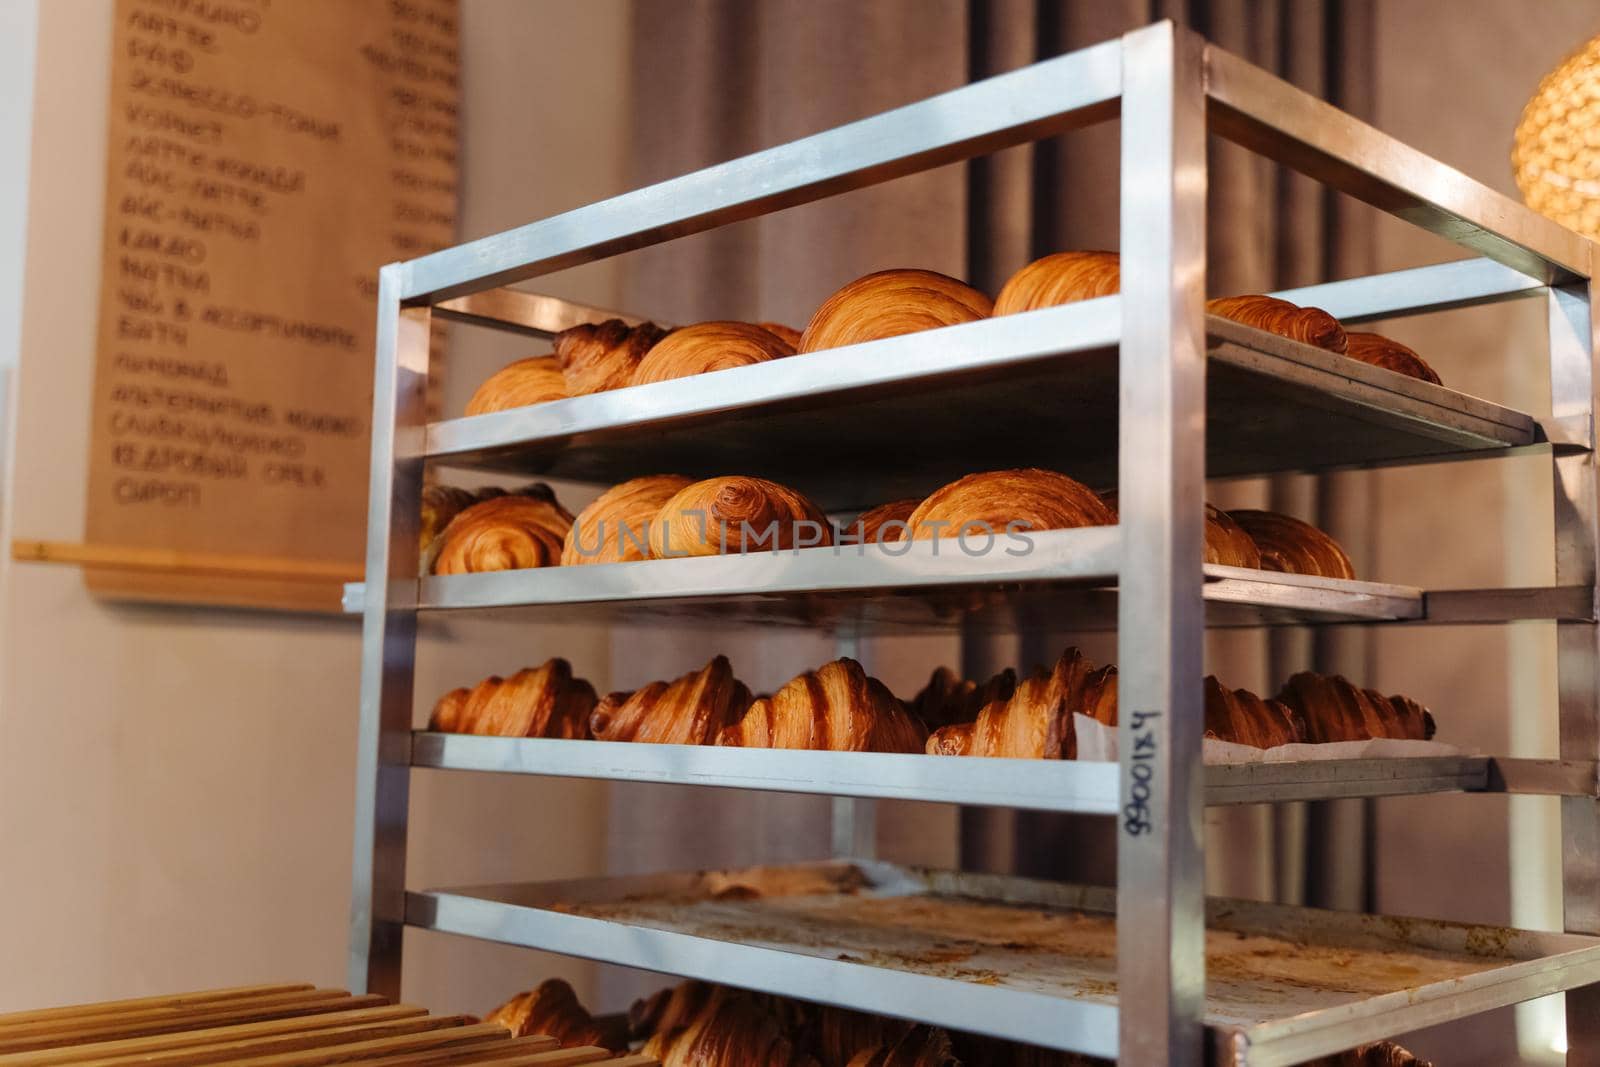 Production of delicious buns. Family bakery. Hot croissants on a metal tray. Fresh bakery. Rack with baked croissants.